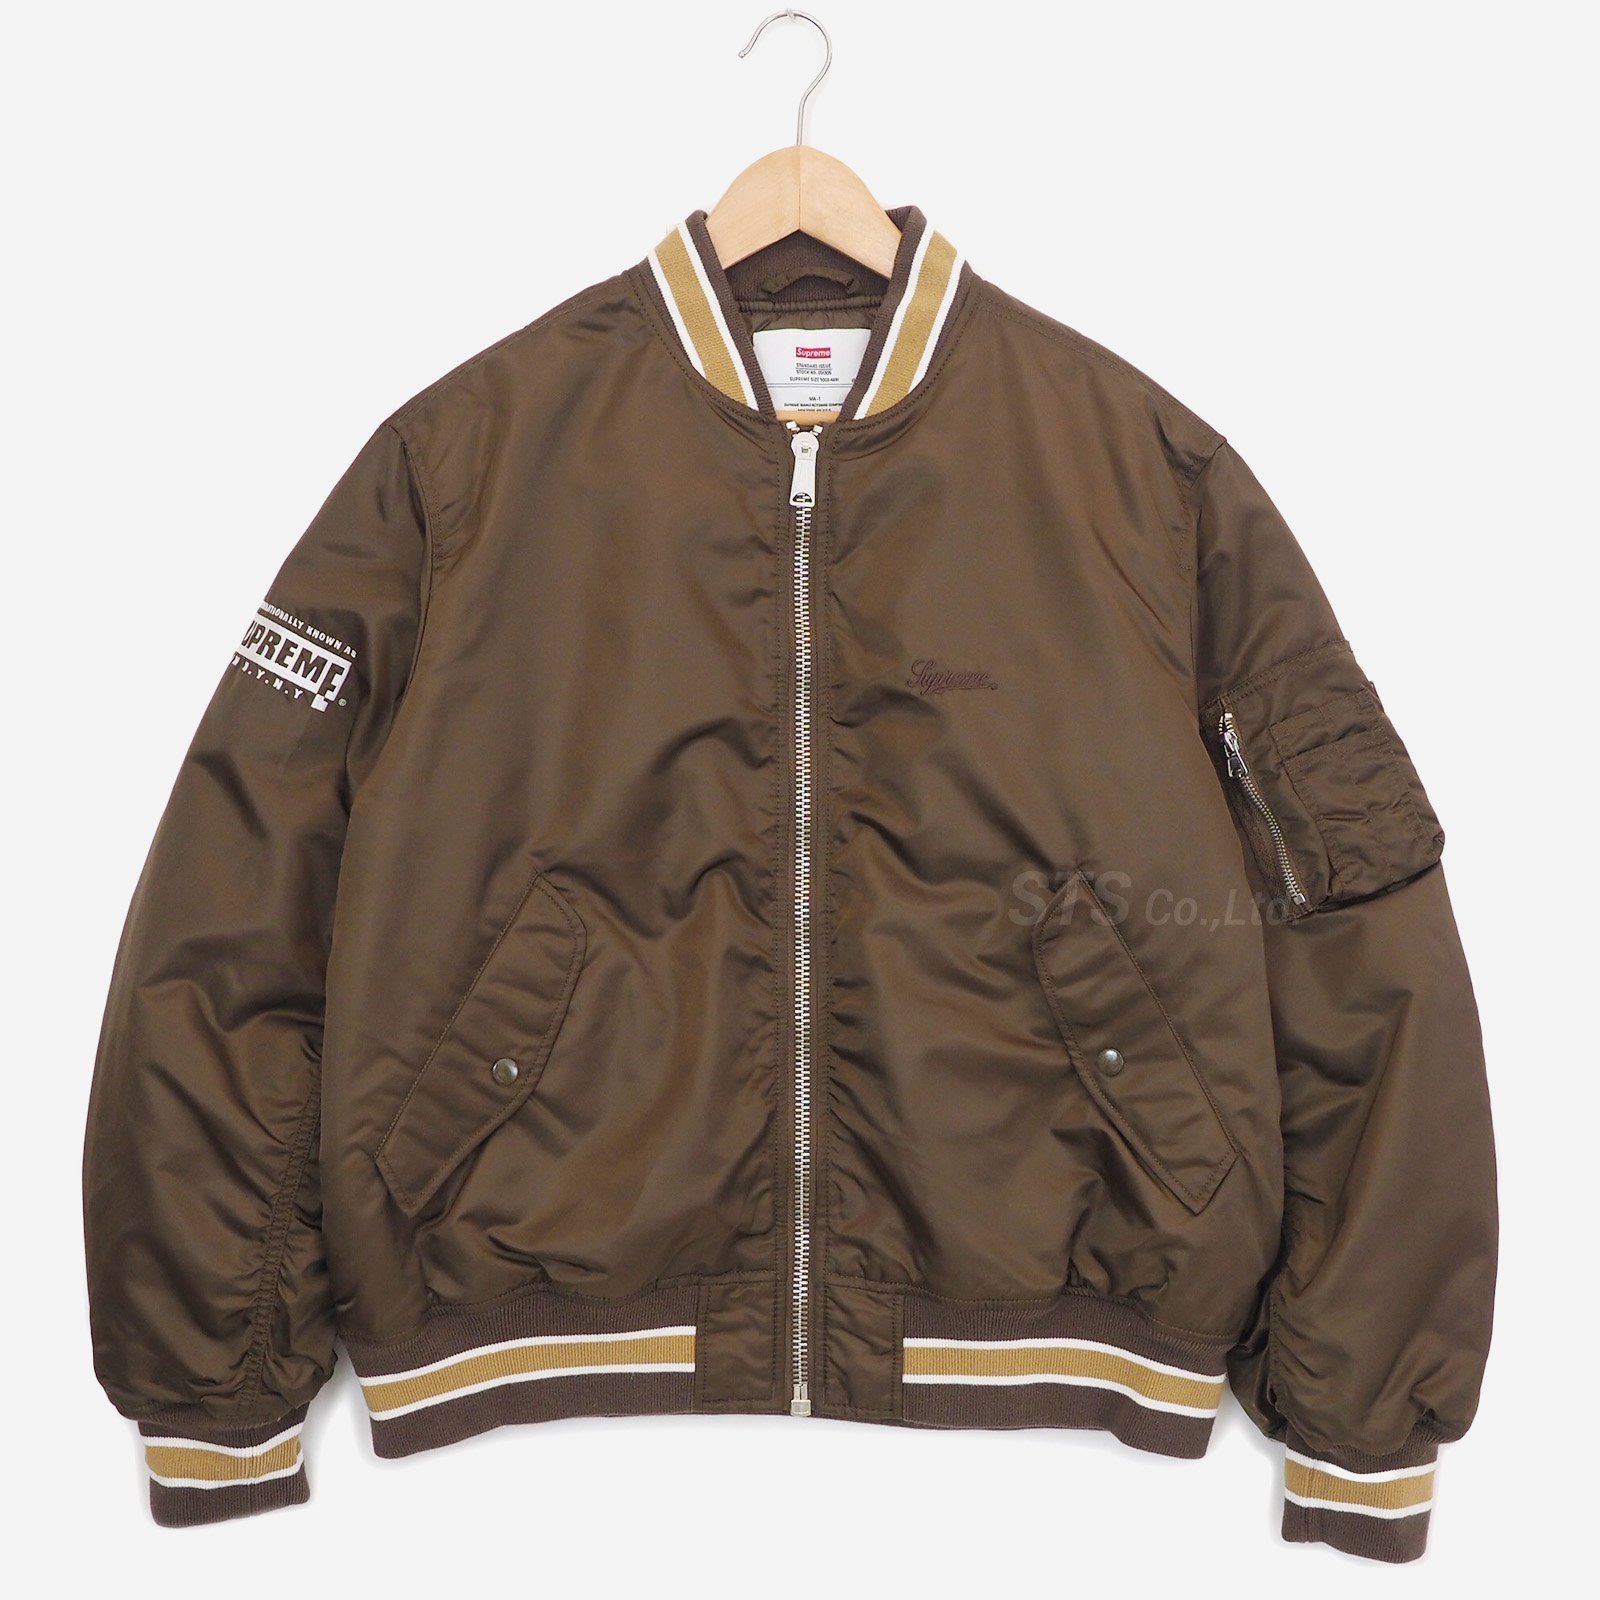 Supreme - Second To None MA-1 Jacket - ParkSIDER